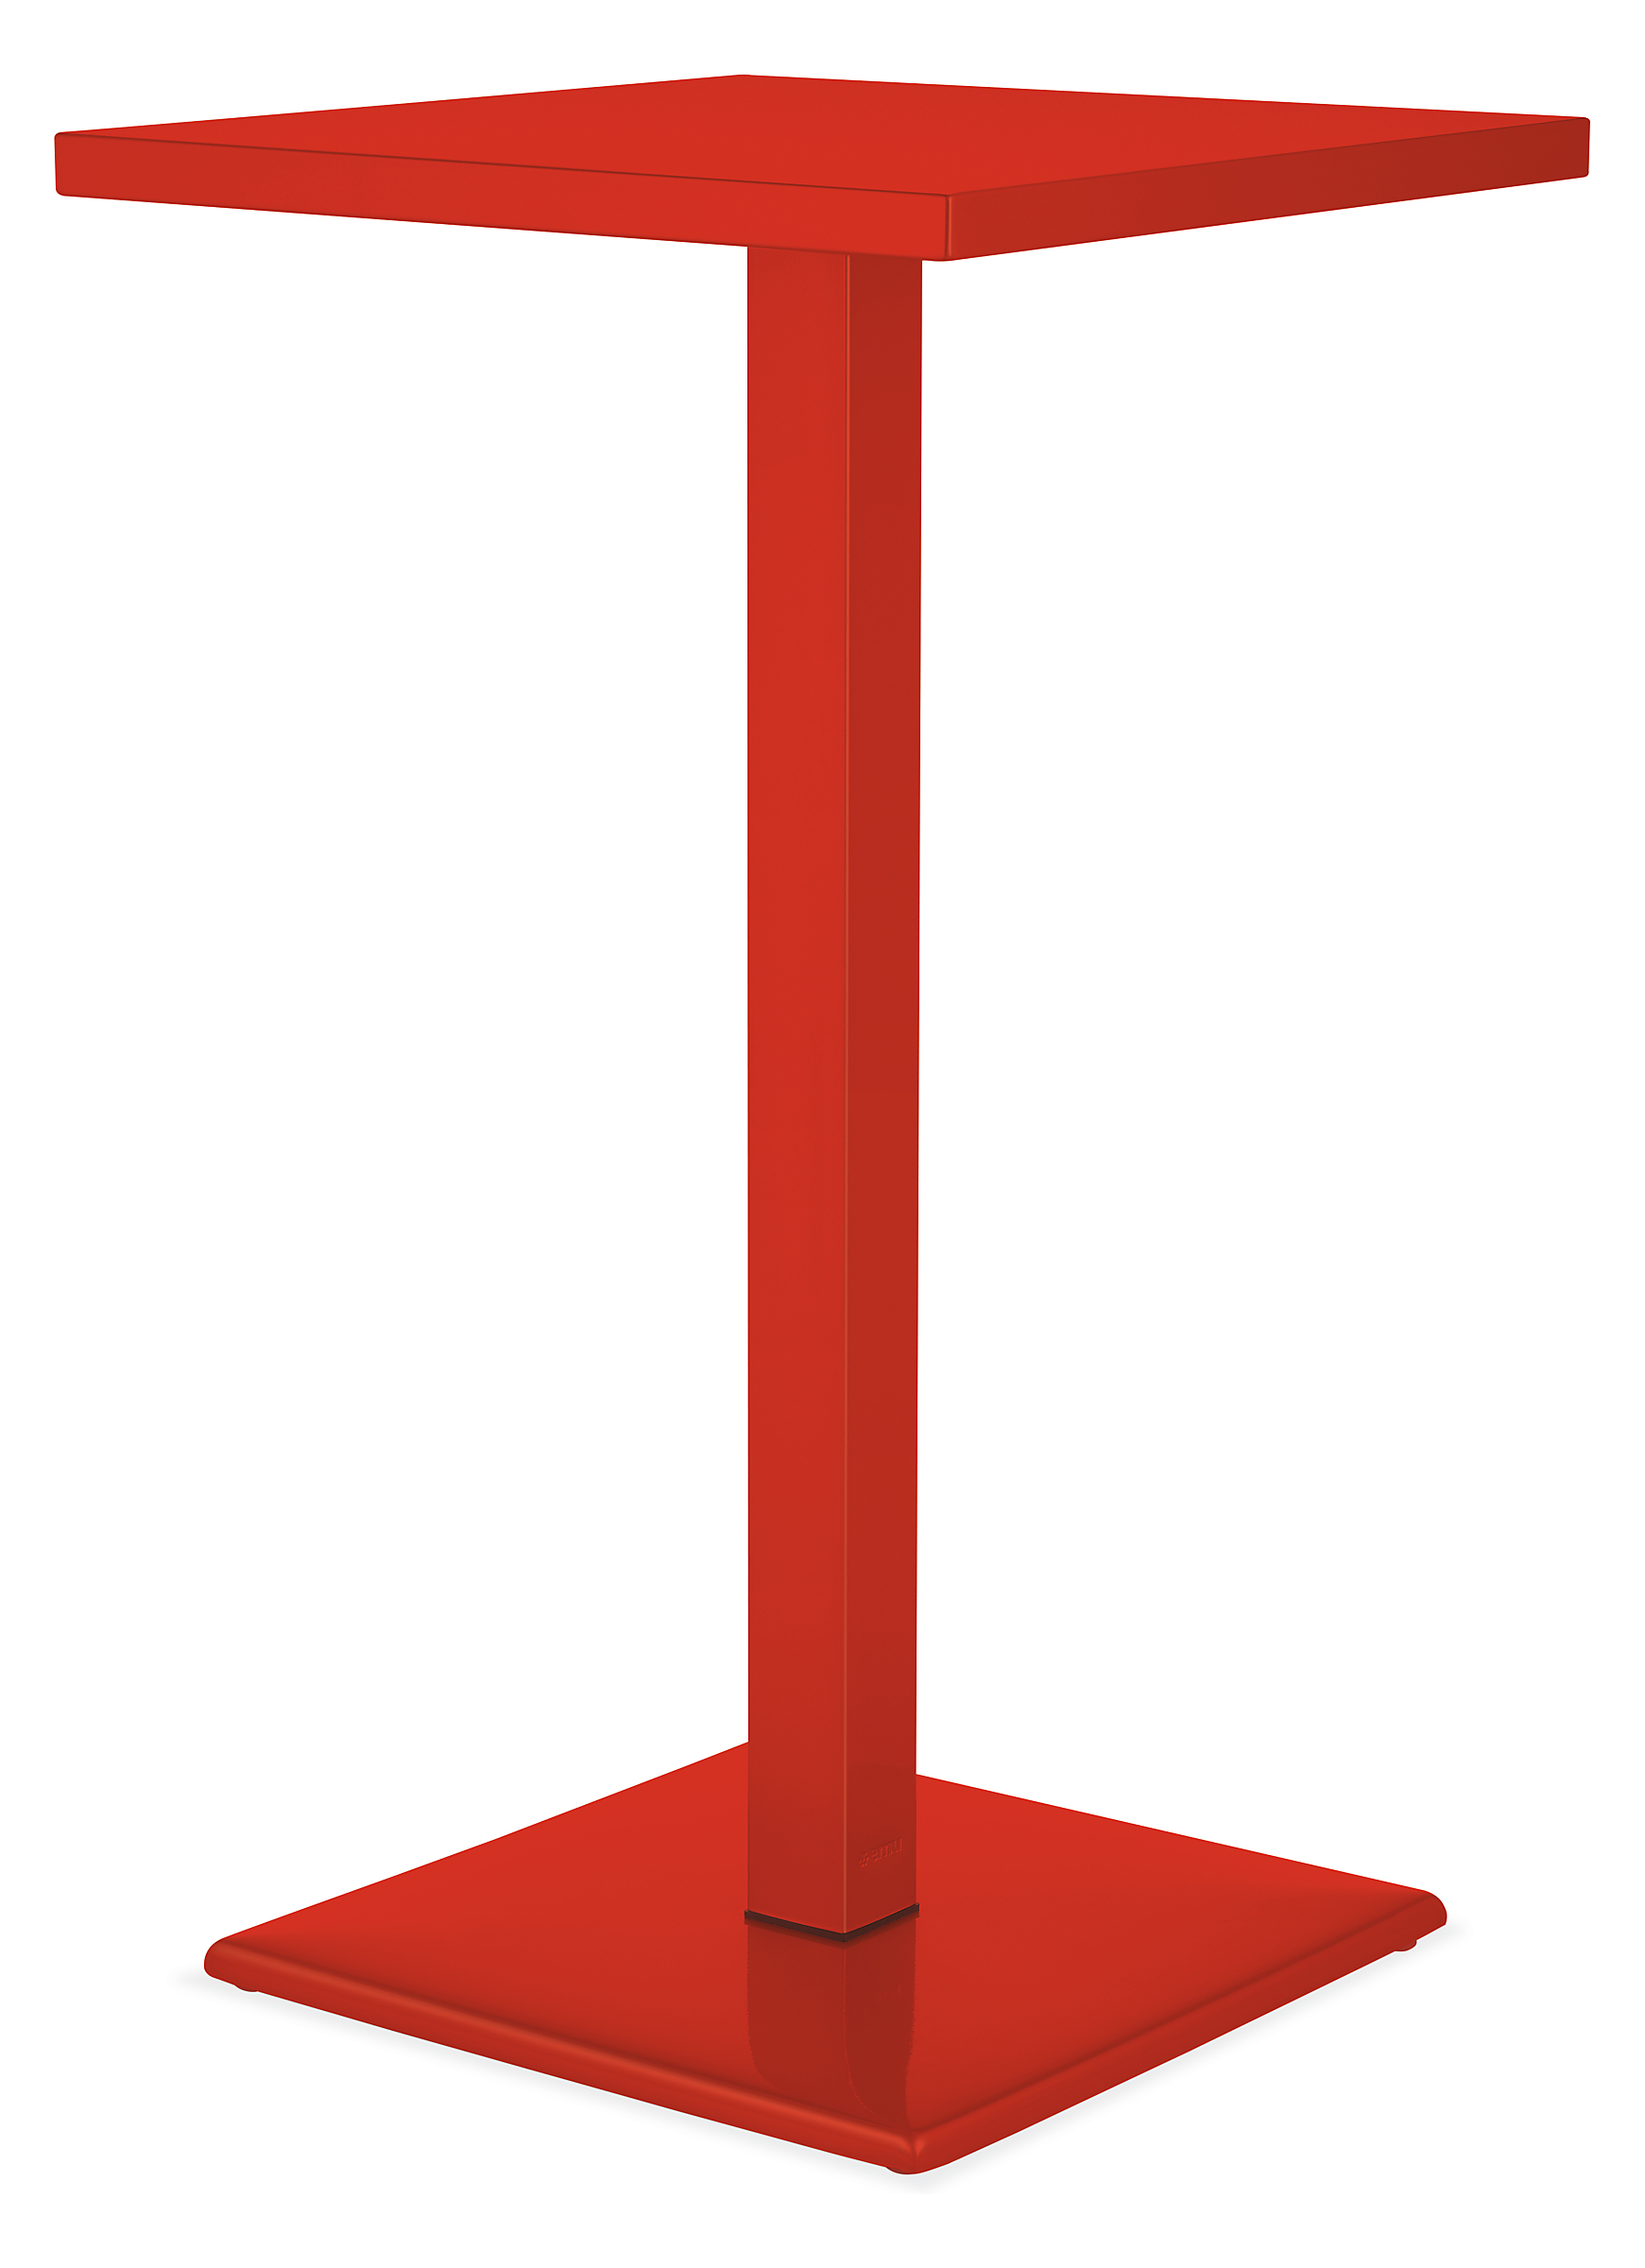 Maris 24w 24d 41h Square Bar Table in Red